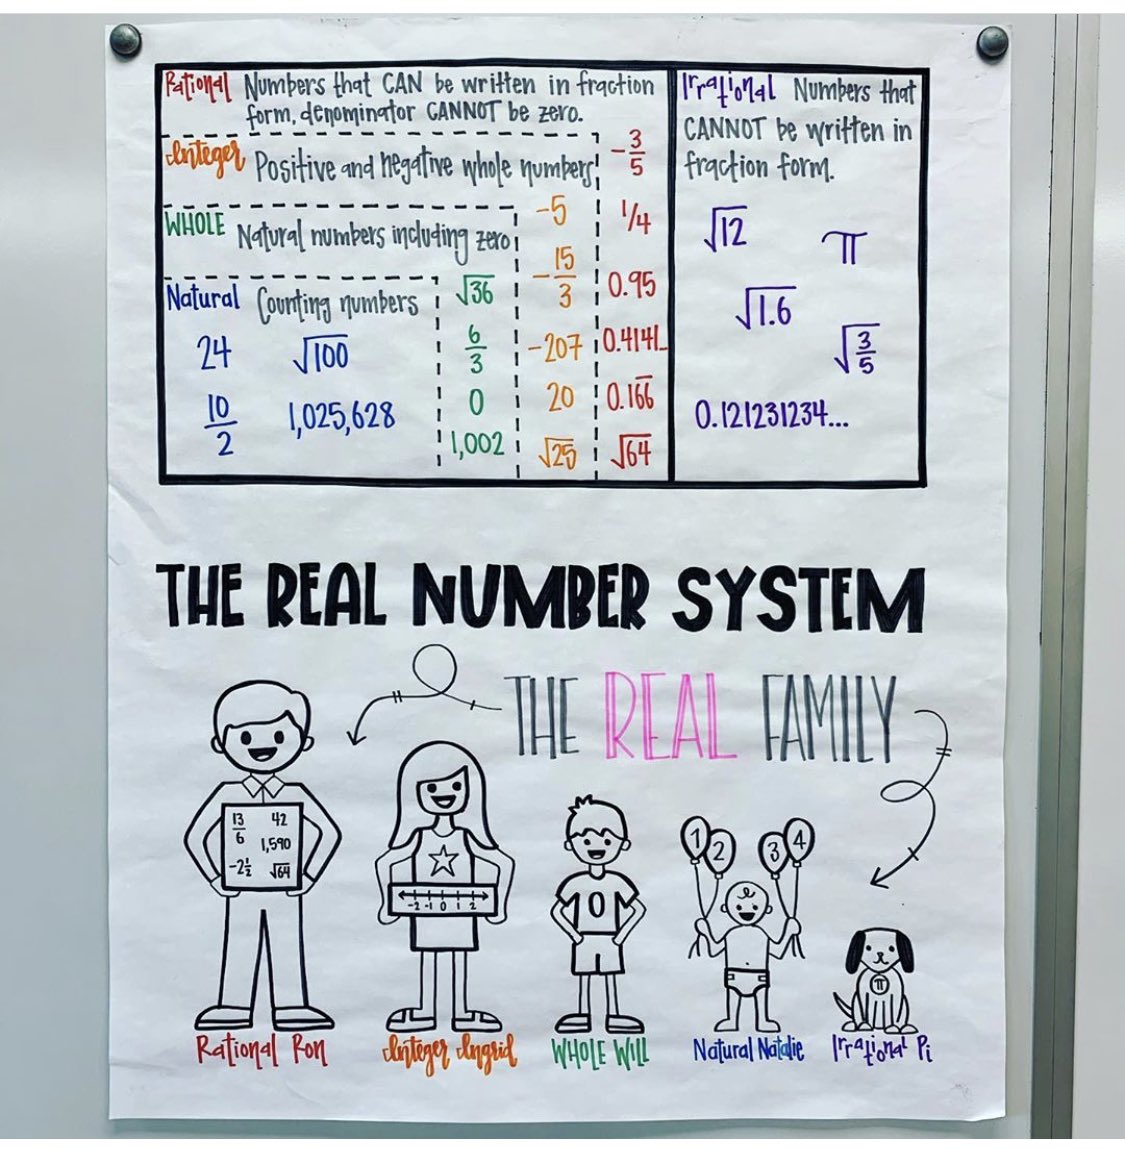 Real Number System Chart